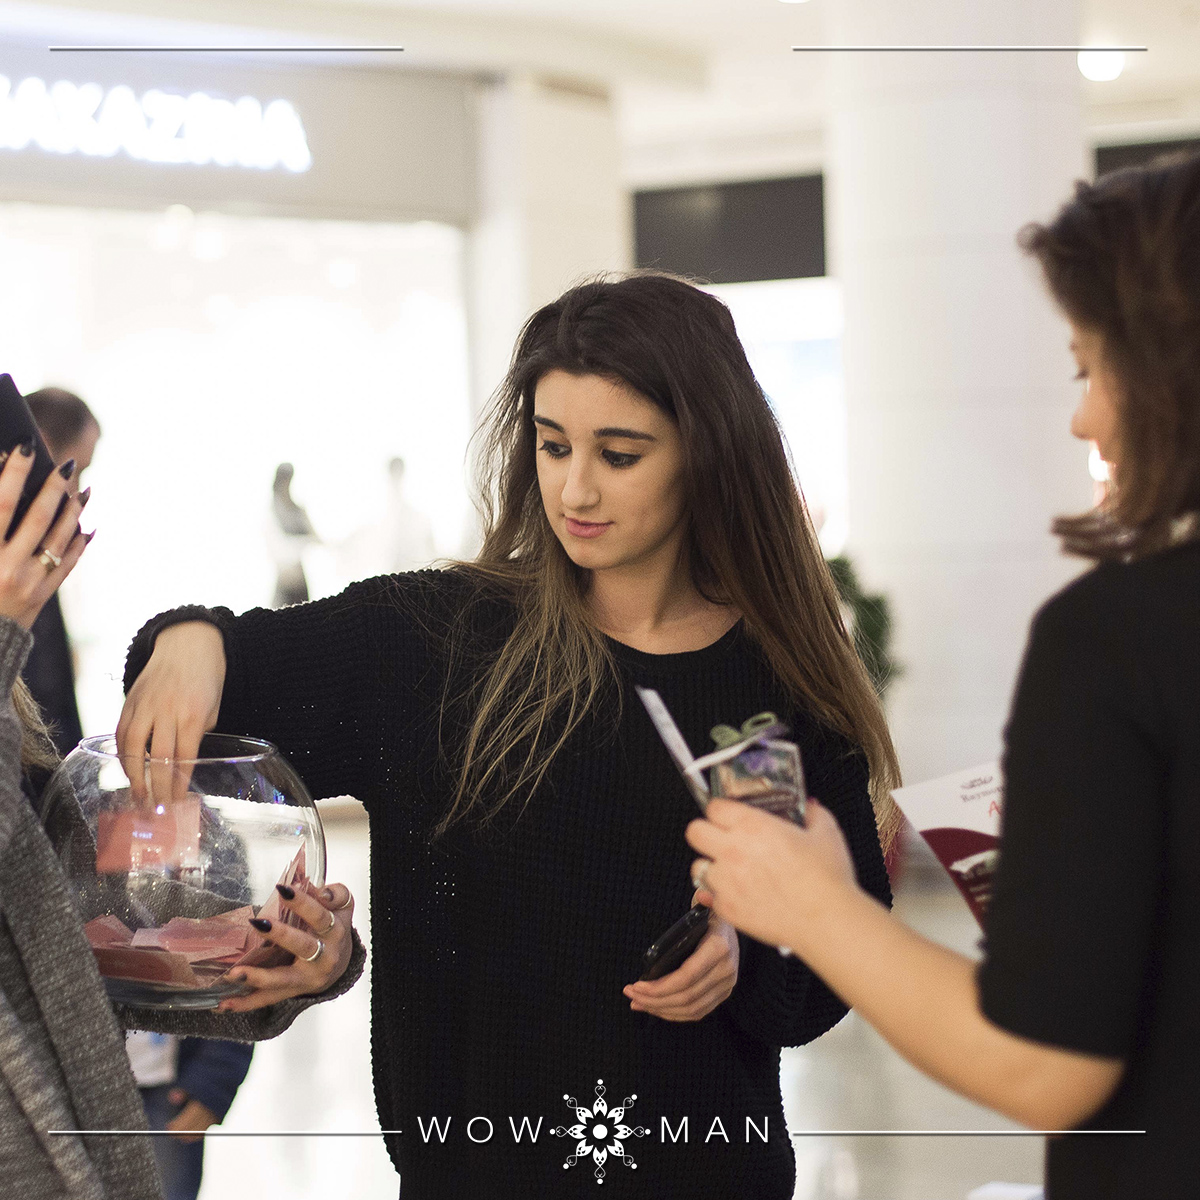 WOWOMAN endeavours to support ladies' dreams